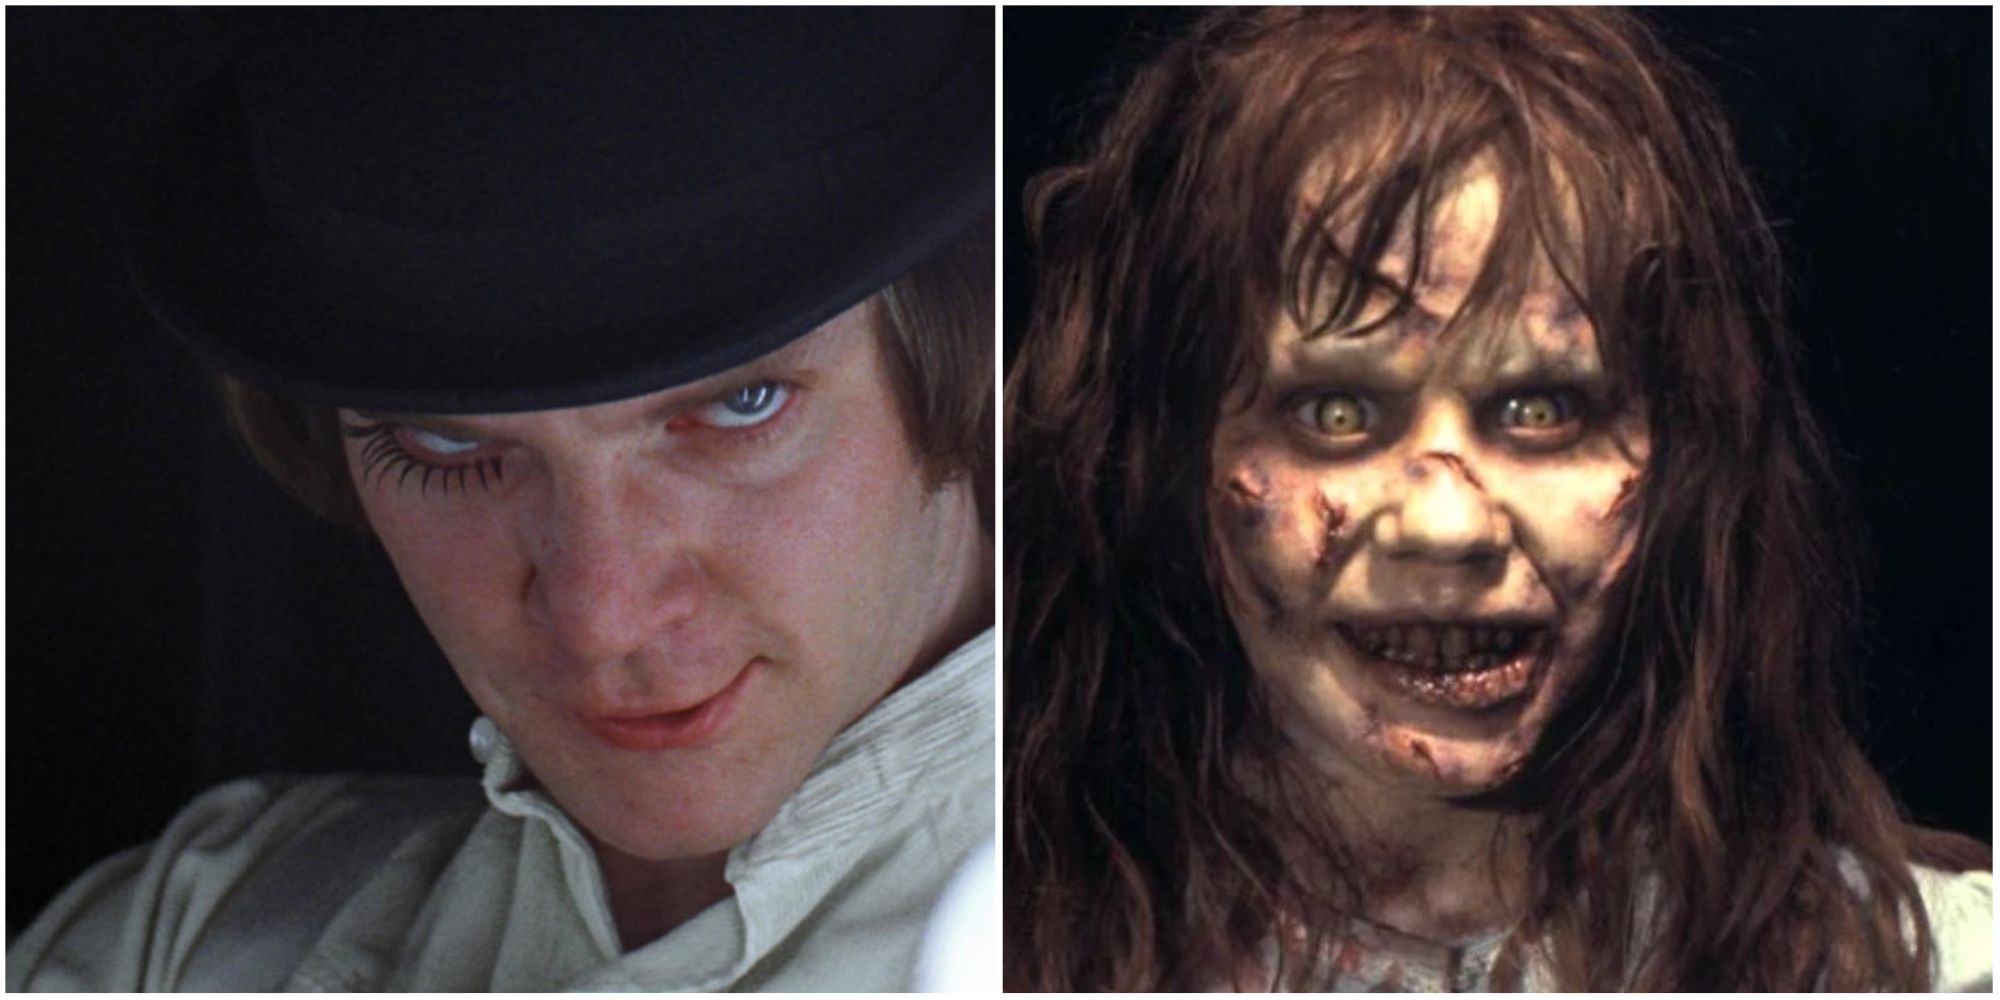 Terrifying Smiles in Horror Movies